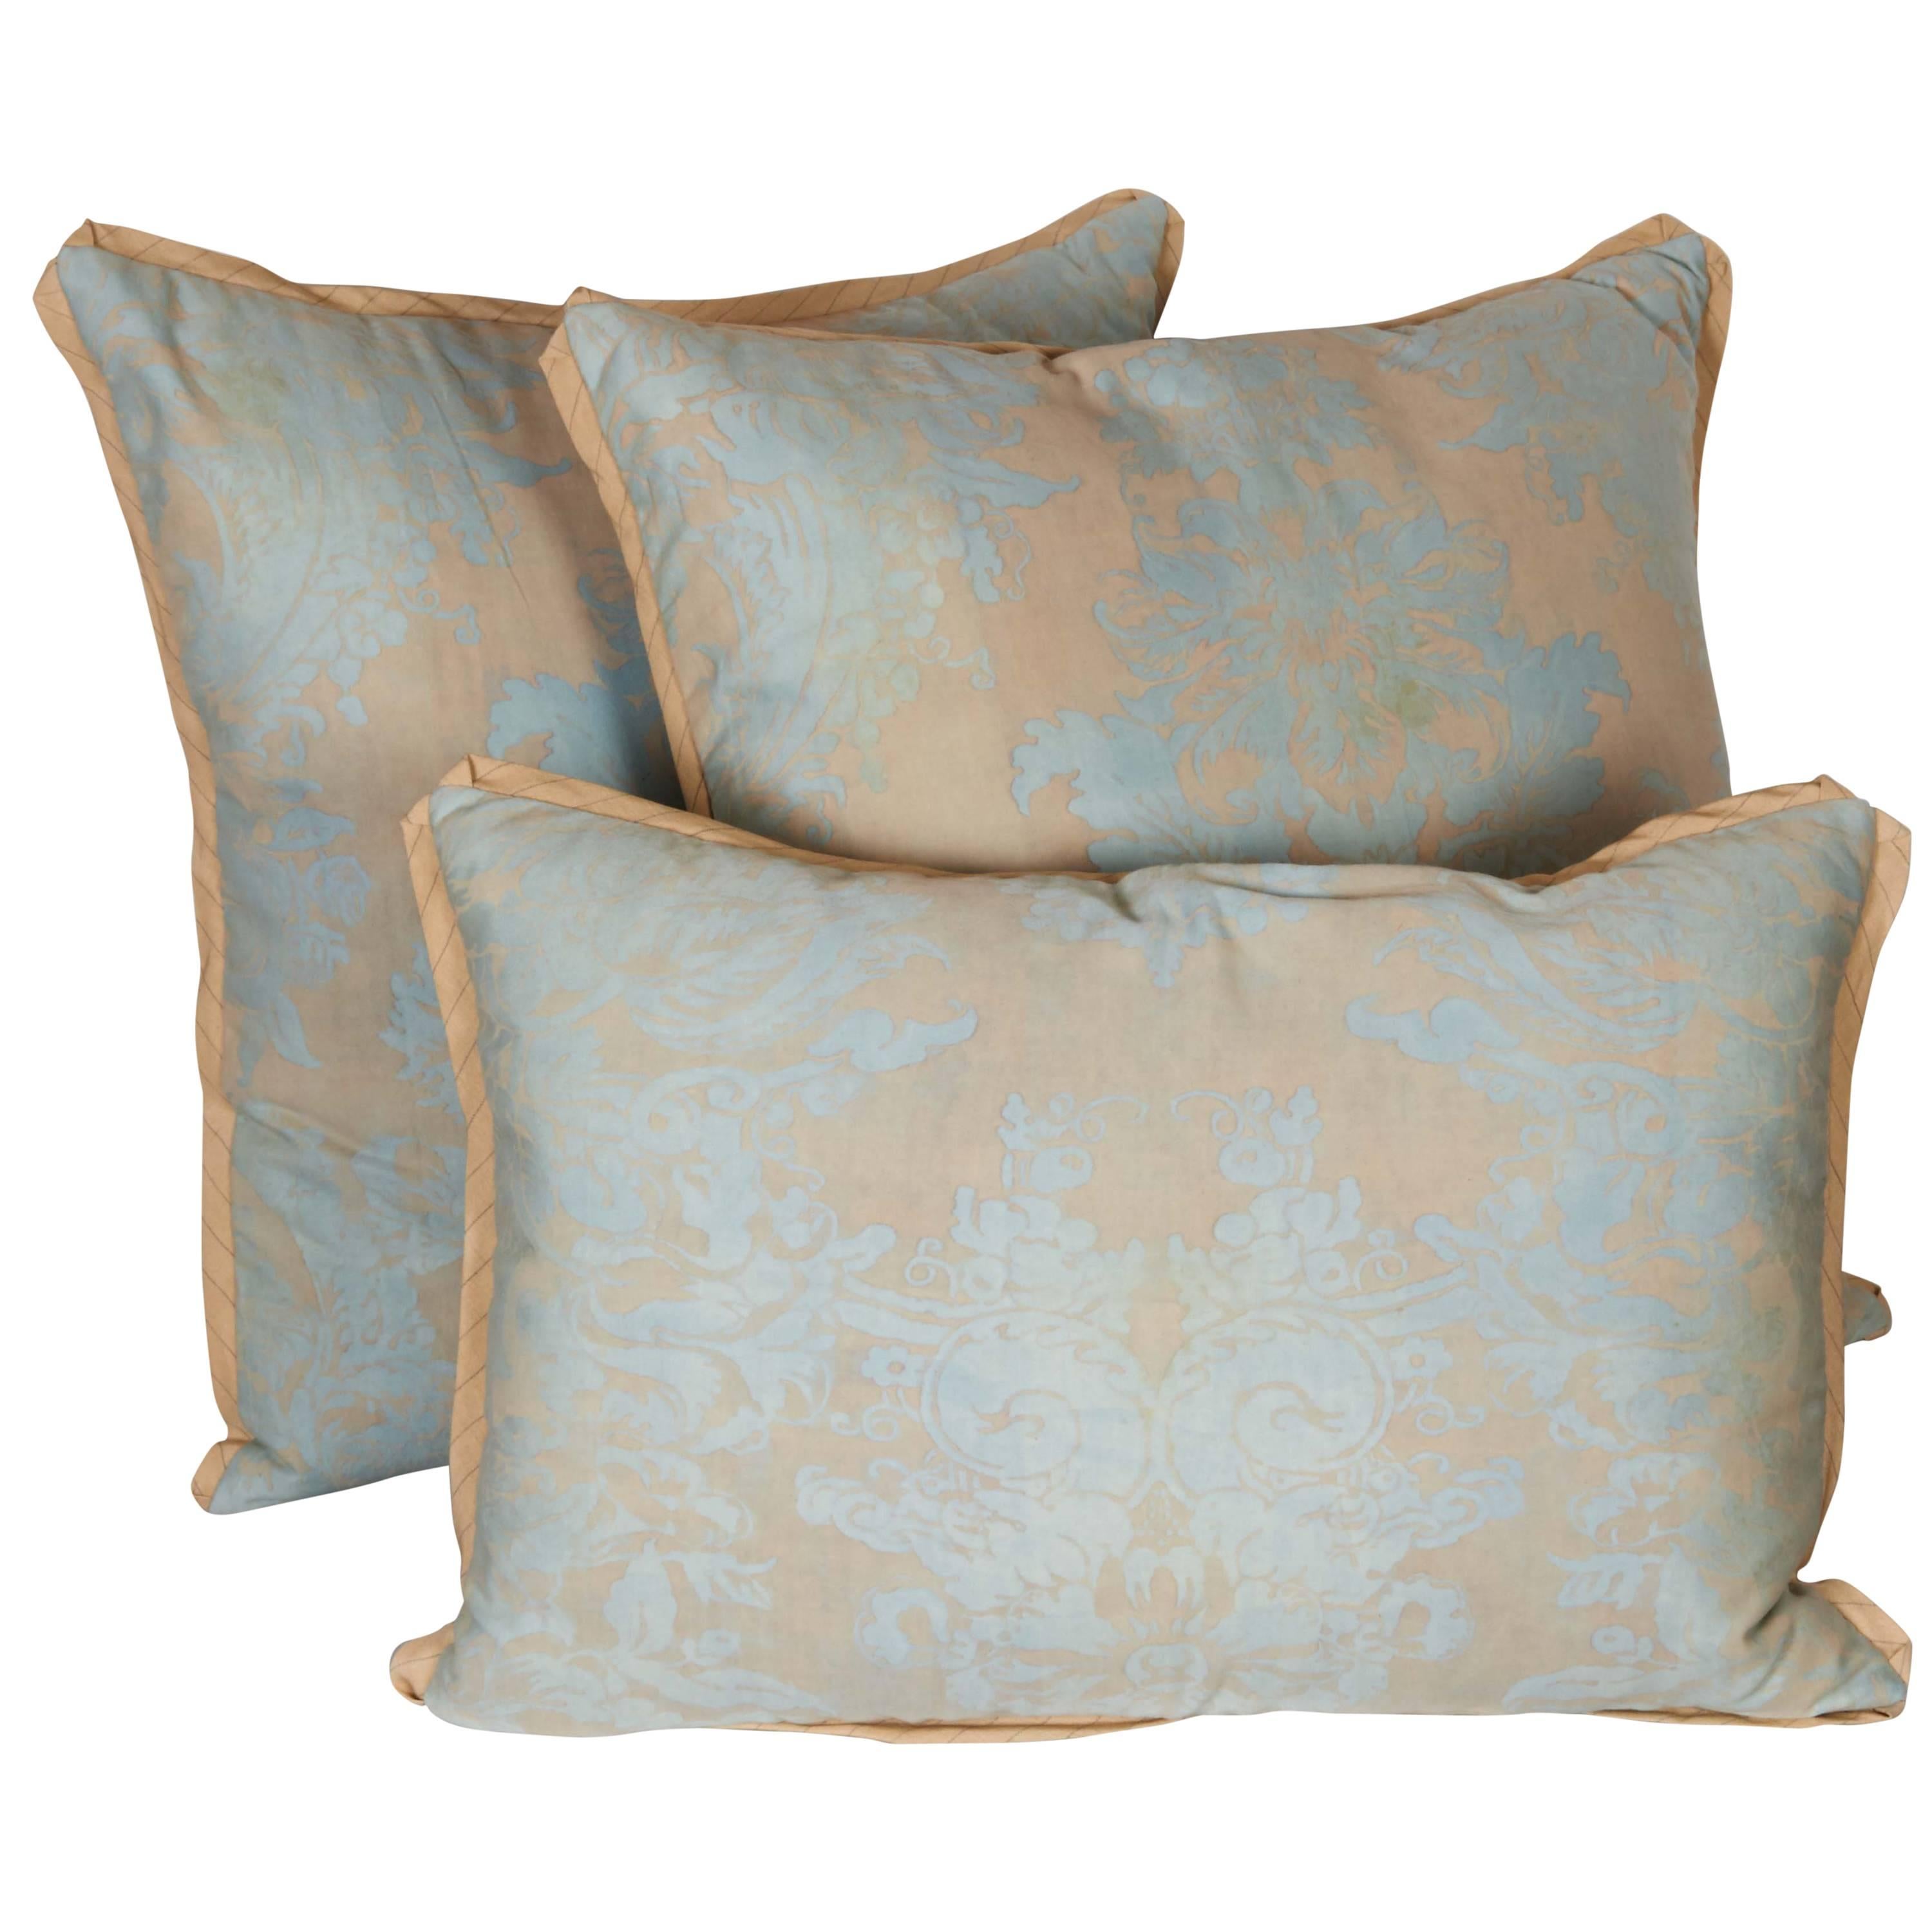 A Set of Fortuny Fabric Cushions in the Dandolo Pattern 